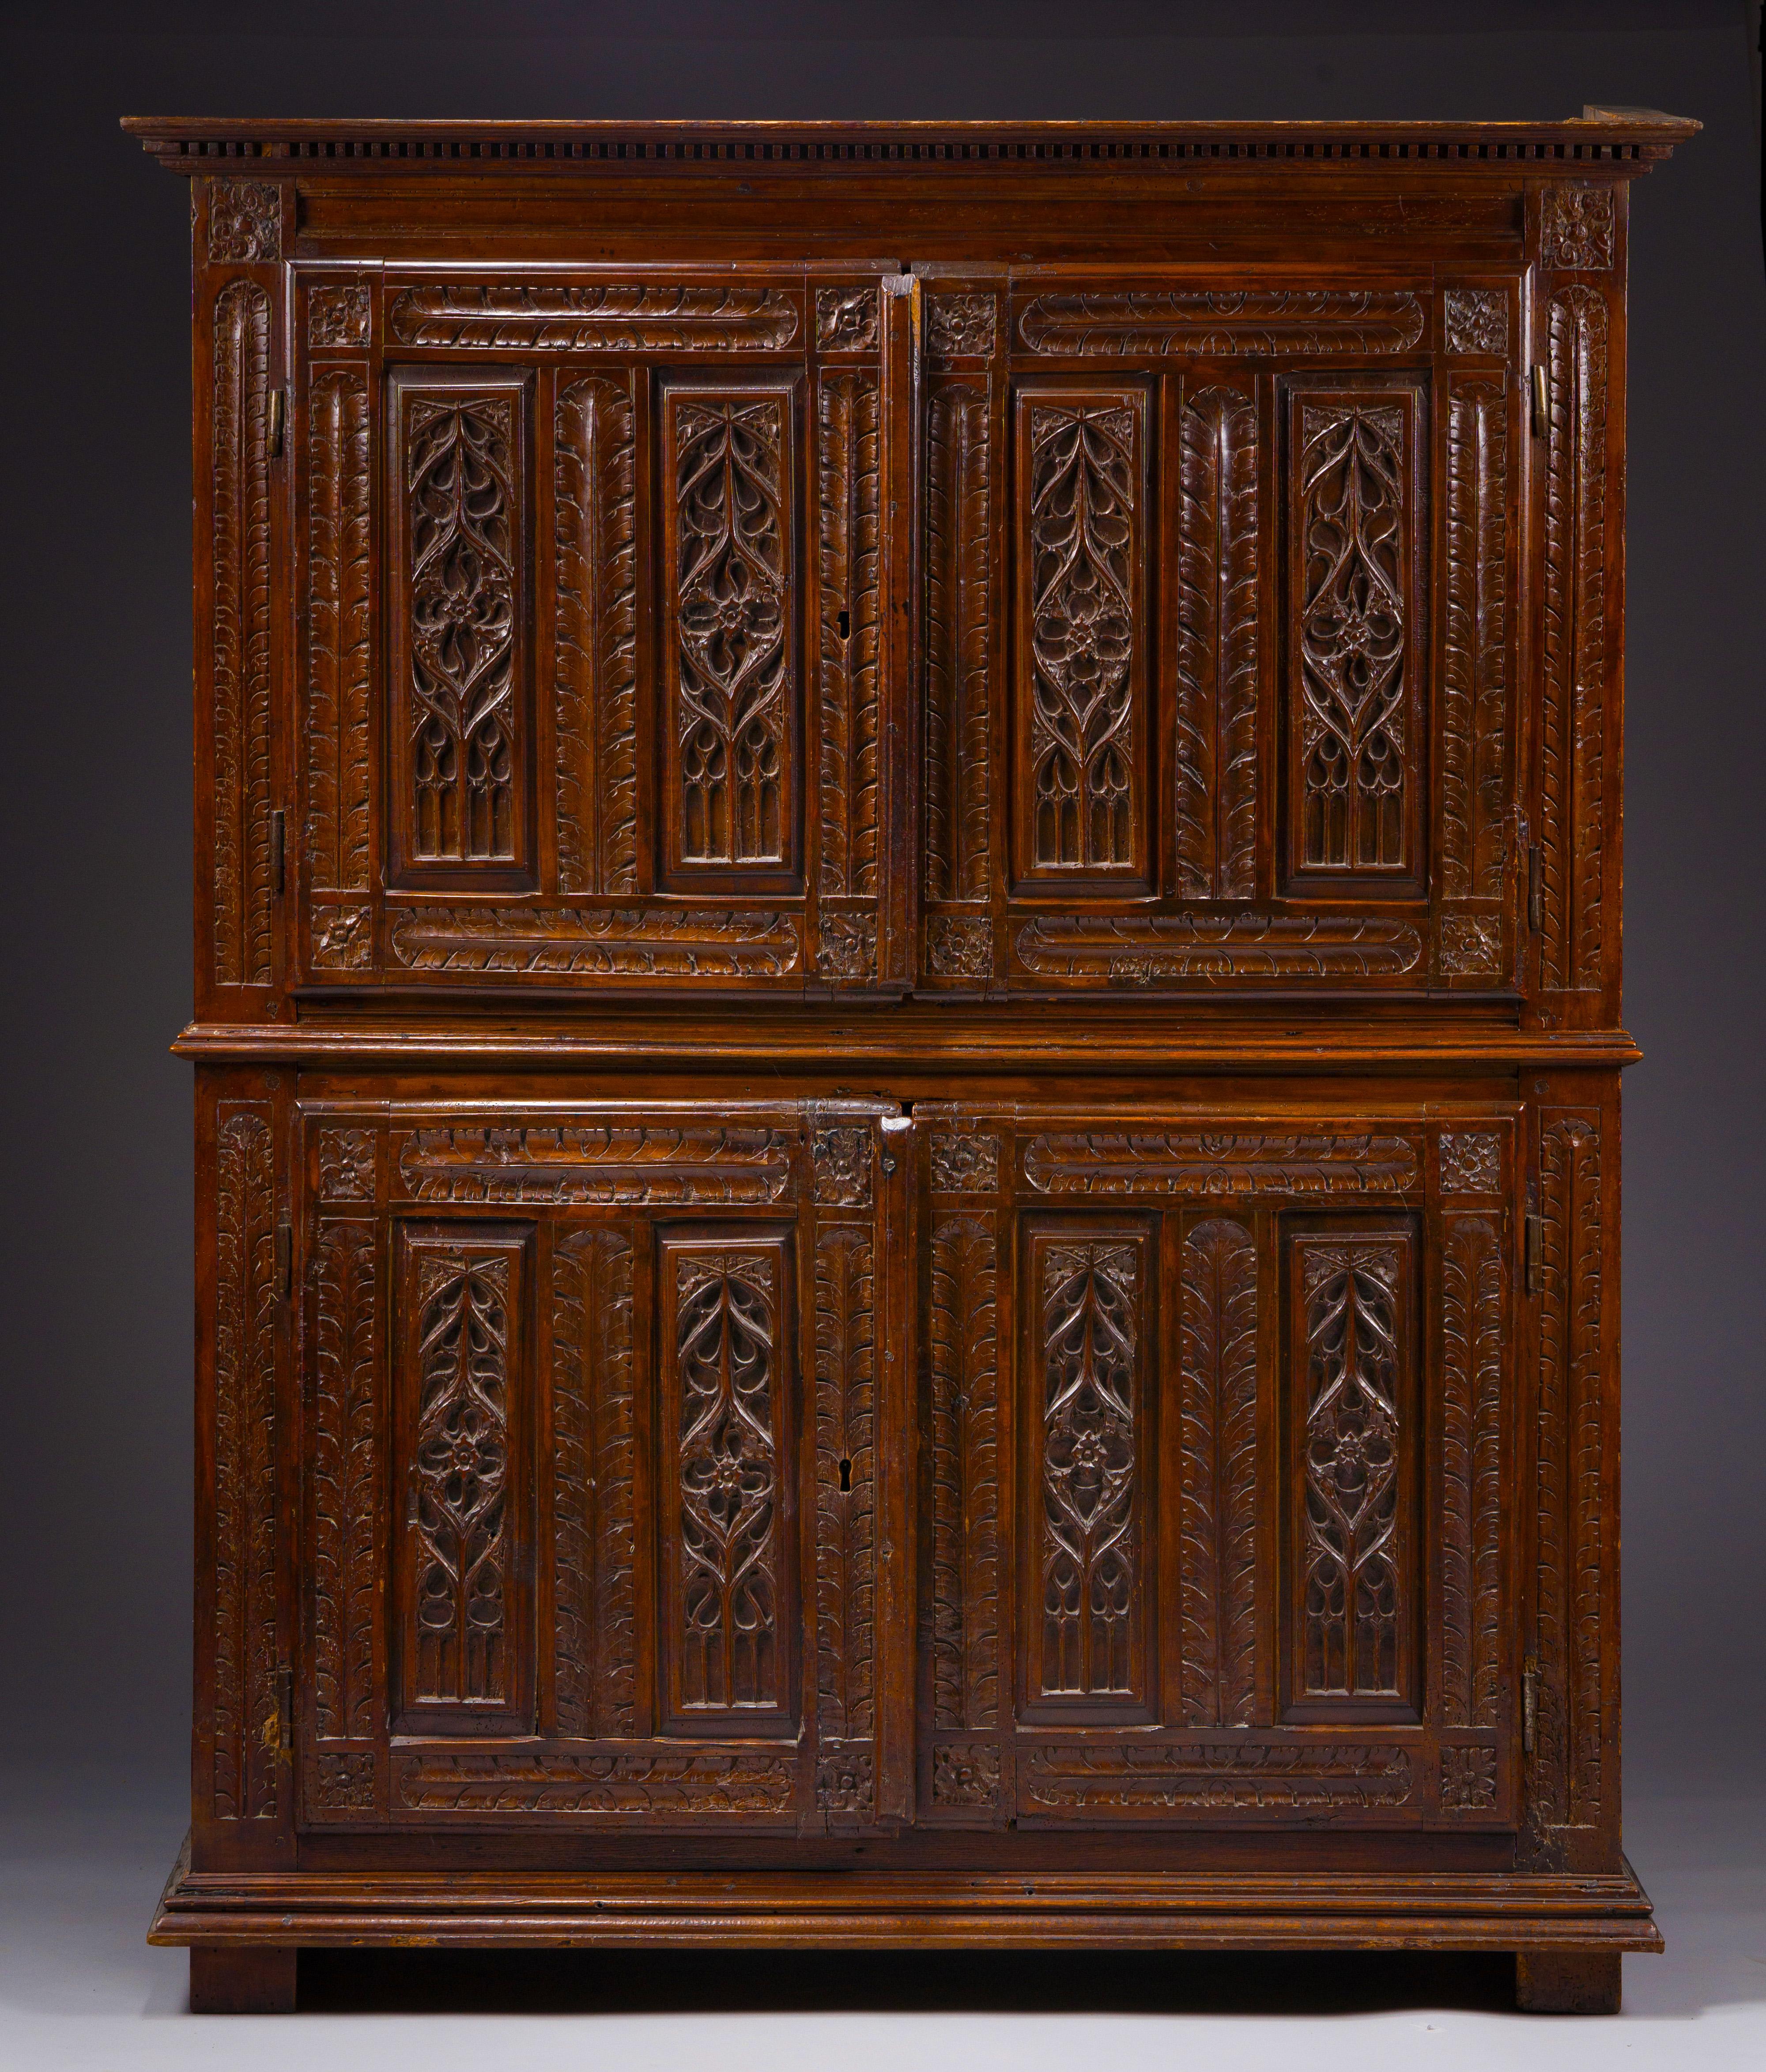 RARE RENAISSANCE CABINET WITH FEATHER QUILL AND FENESTRATION DECORATION

ORIGIN: FRANCE
PERIOD: EARLY 16th CENTURY

DIMENSIONS :
Height :  178 cm
Length : 145 cm
Depth : 58 cm

Walnut wood
Good state of conservation
Original keys and locks

This